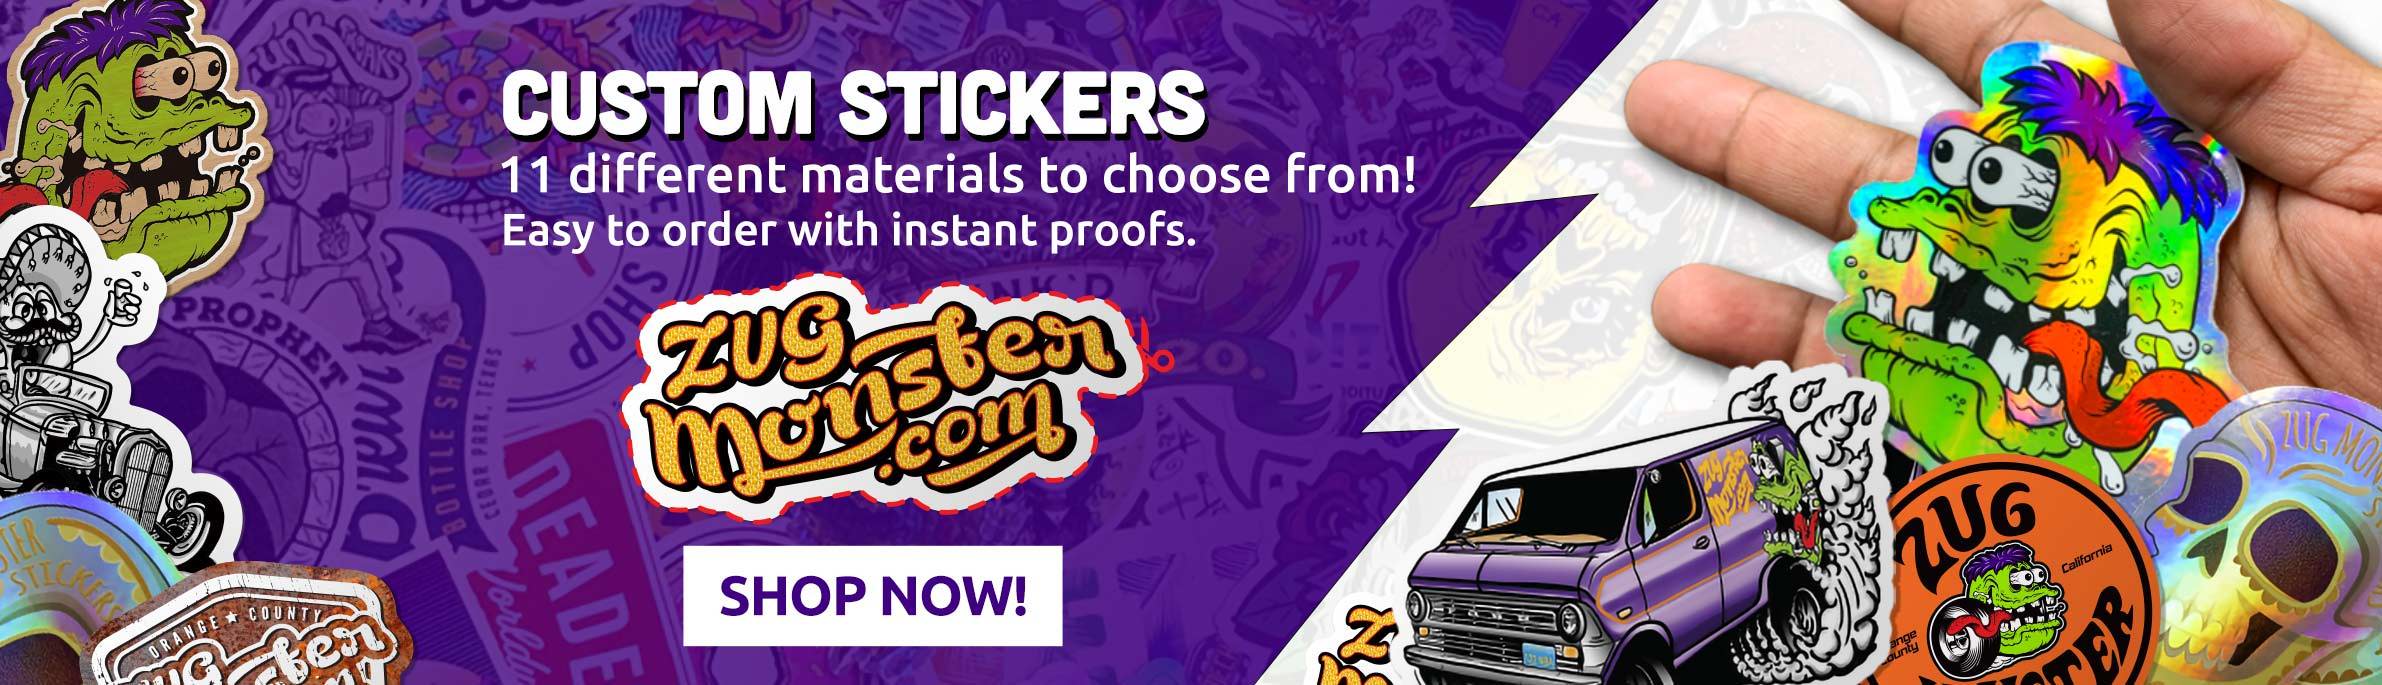 Custom Stickers. 11 different materials to choose from! Easy to order with instant proofs. Order your diecut stickers today!